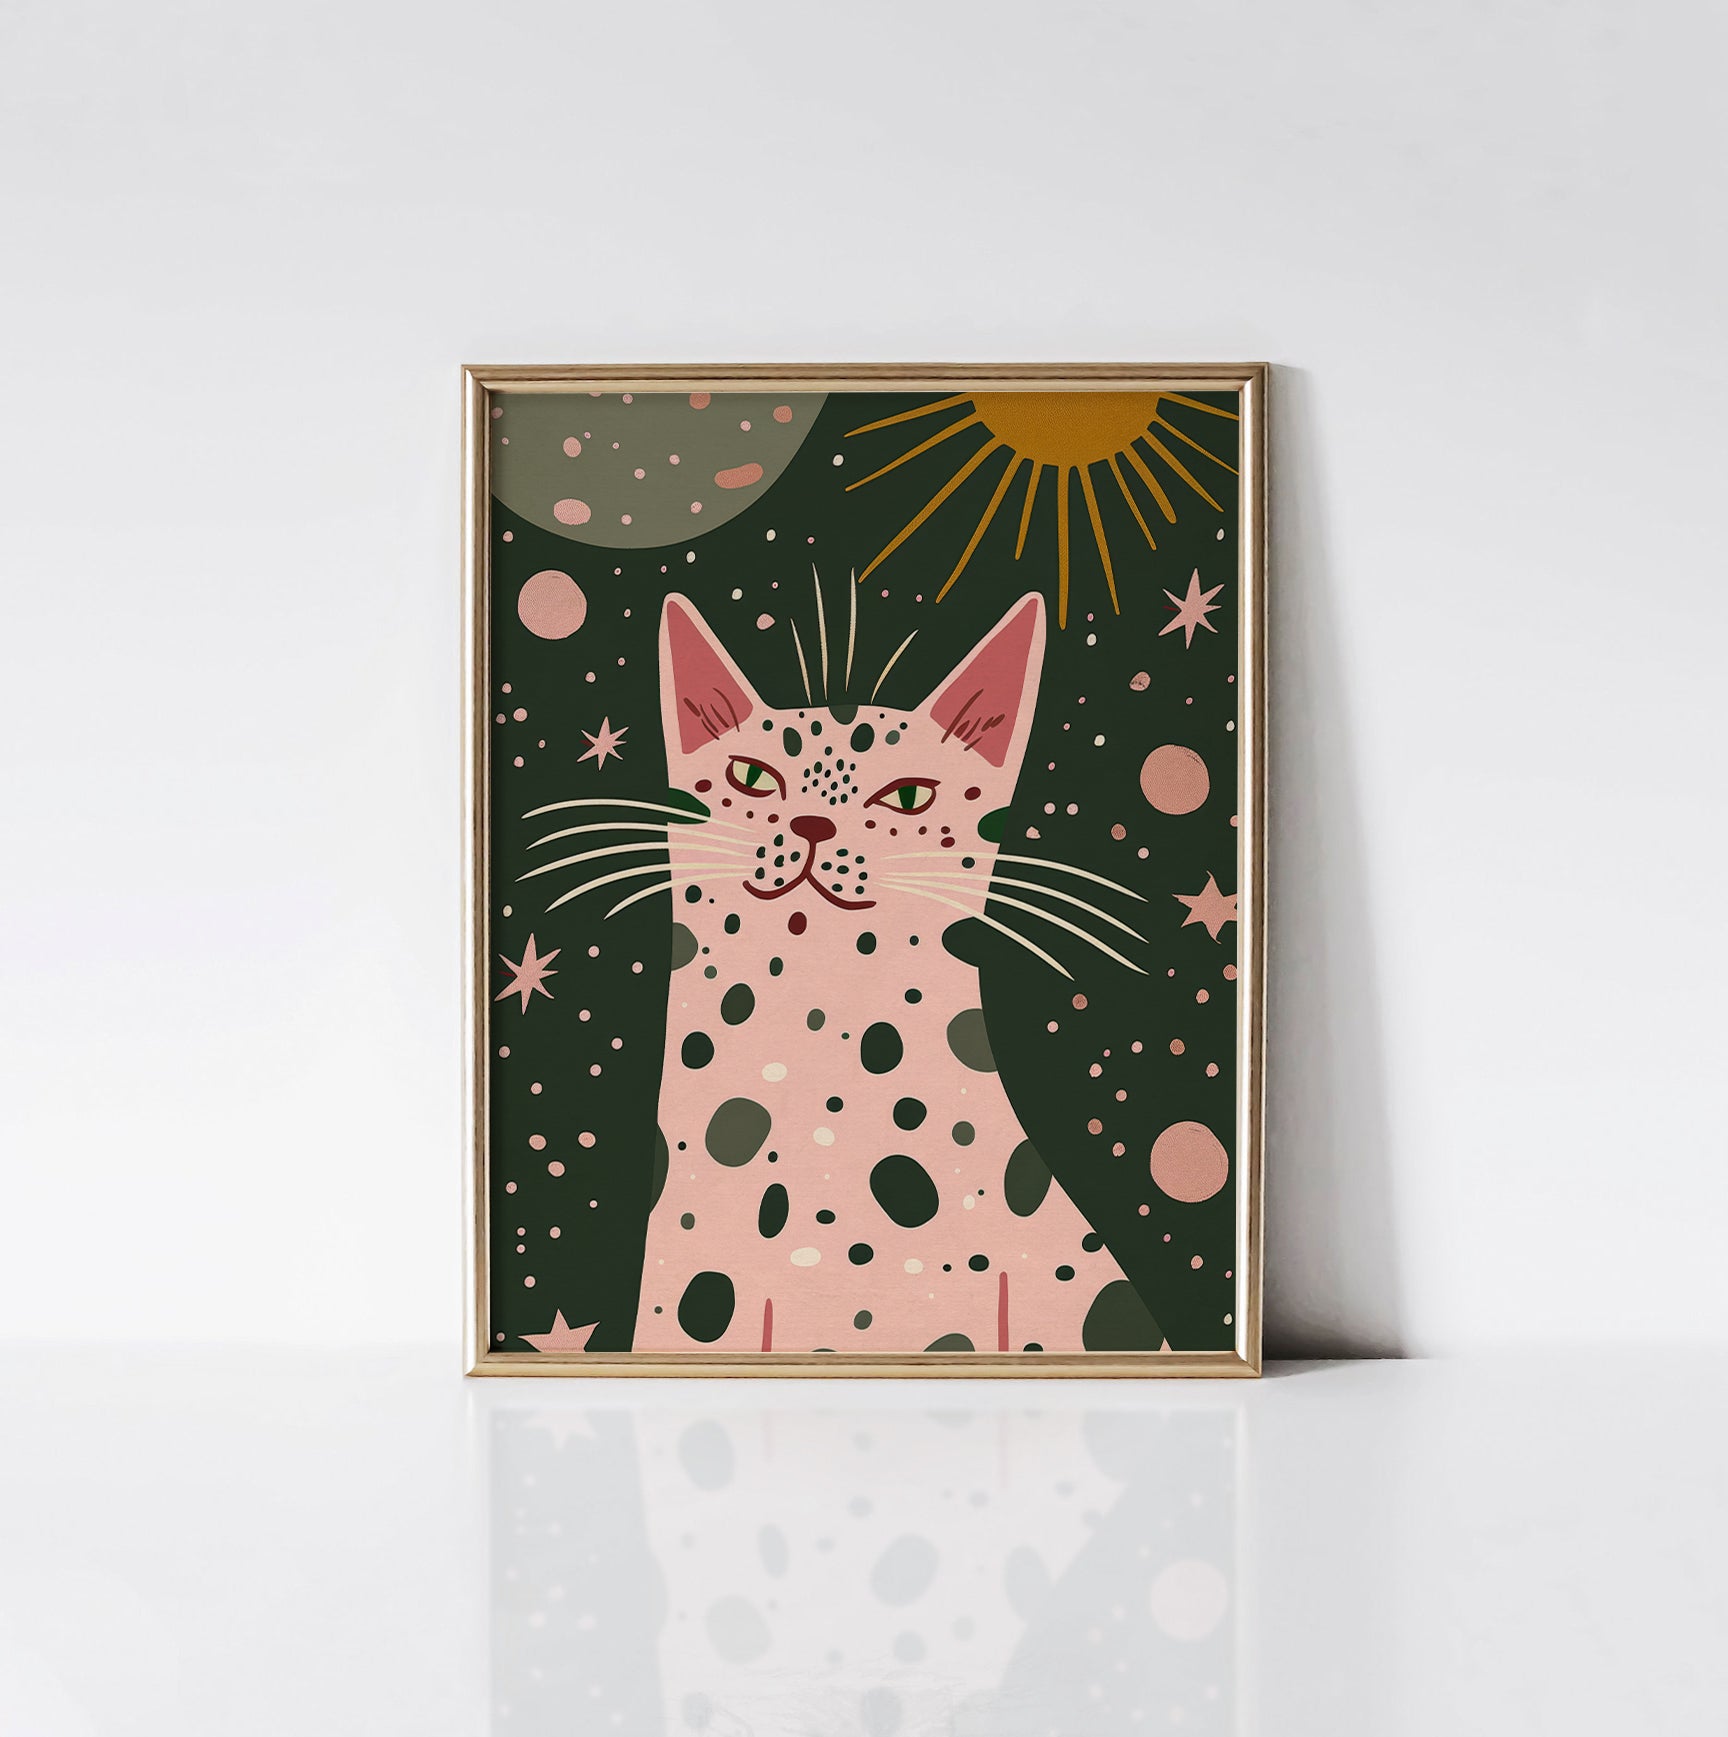 Galactic Cat Art Print framed in an elegant gold frame, showcasing a playful pink cat with green eyes and black spots surrounded by stars, planets, and a golden sun on a dark green background.